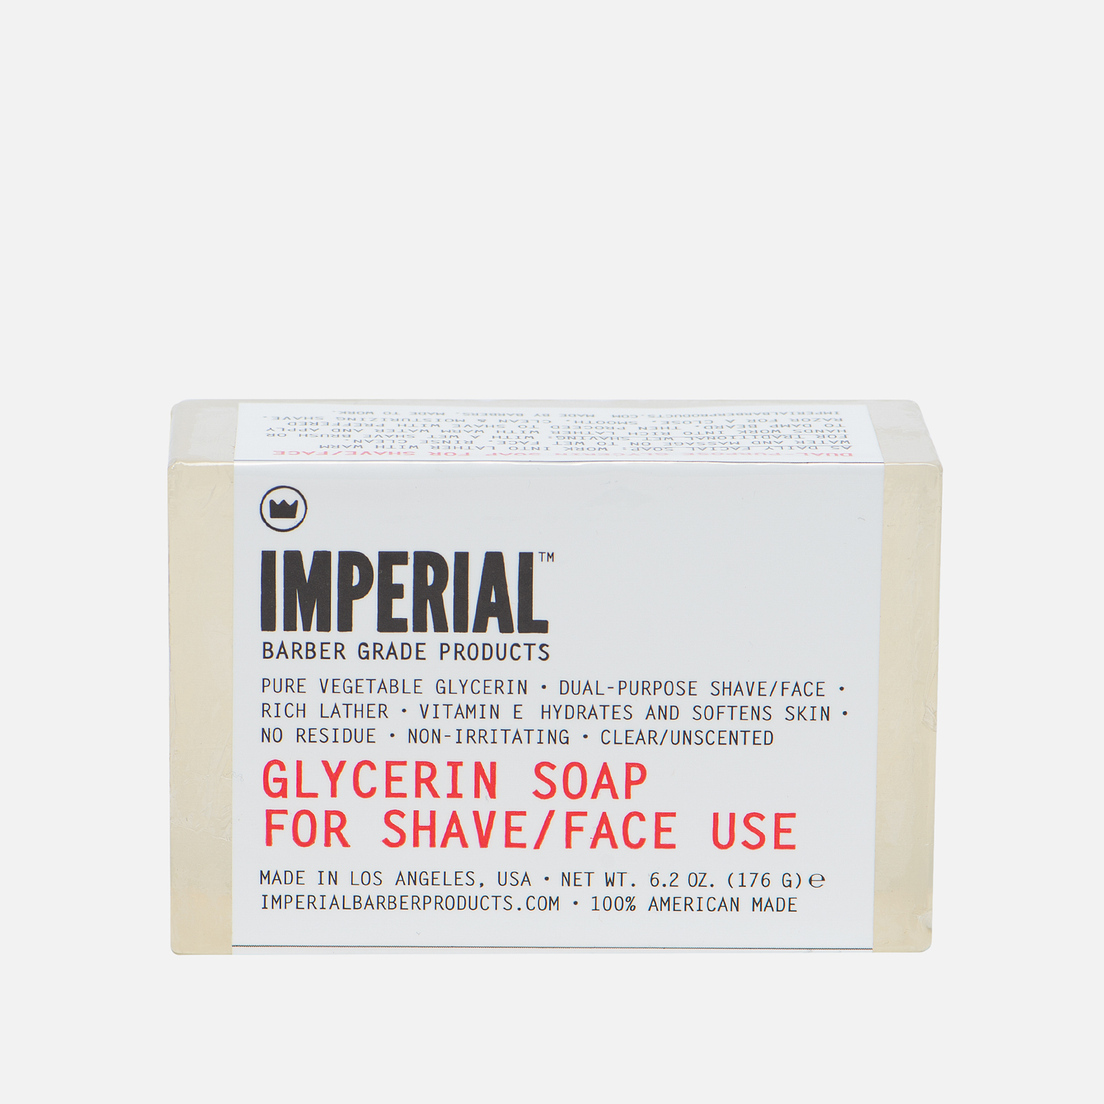 Imperial Barber Мыло Glycerin For Shave/Face 176g